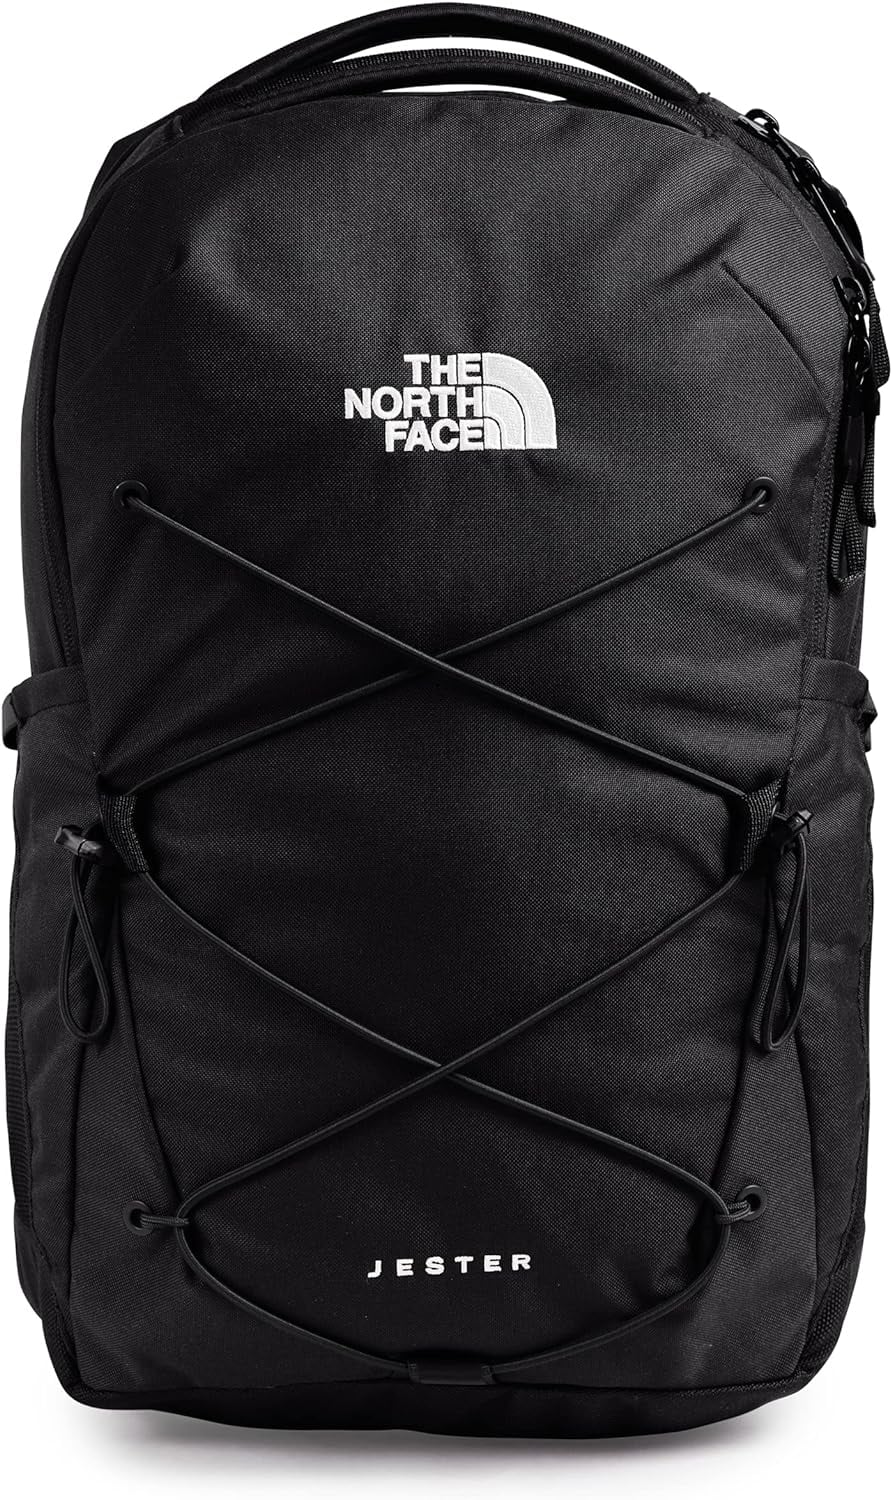 <p><a href="https://www.amazon.com/North-Face-Womens-Jester-Black/dp/B0823VNN1P/">BUY NOW</a></p><p>$75</p><p><a href="https://www.amazon.com/North-Face-Womens-Jester-Black/dp/B0823VNN1P/" class="ga-track"><strong>The North Face Women's Jester Commuter Laptop Backpack</strong></a> ($75) </p><p>The North Face's winter gear is pretty hard to beat, and so is this backpack. The bungee system on the front isn't just for looks, but also to hold items you want fast access to, such as a map. It's also certified by the American Chiropractic Association, features a padded 16-inch laptop sleeve, and can stand upright for easy loading and unloading. </p>